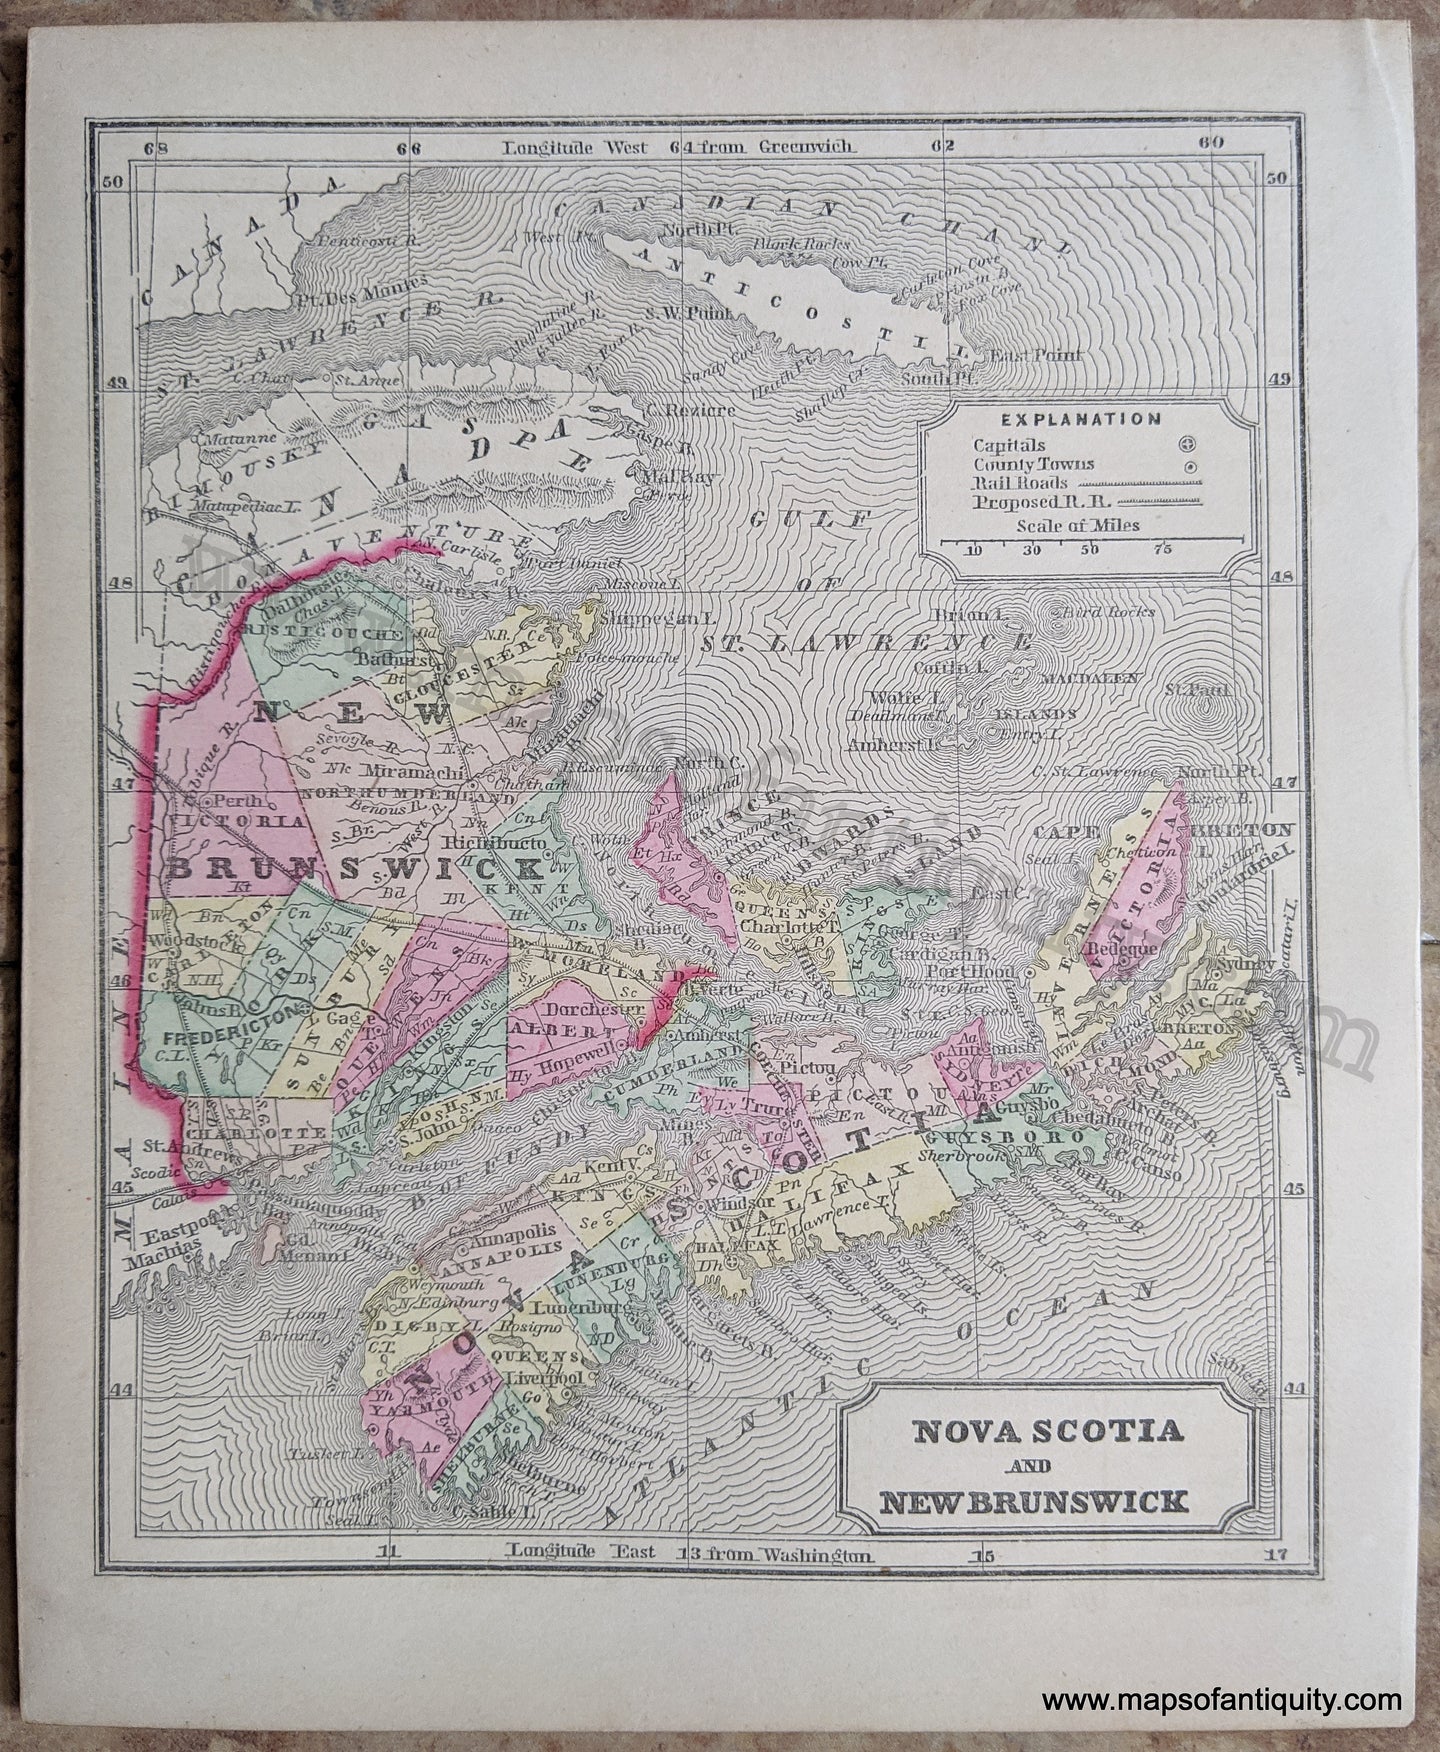 Antique-Hand-Colored-Map-Nova-Scotia-and-New-Brunswick-Canada-East-1857-Morse-and-Gaston-Maps-Of-Antiquity-1800s-19th-century